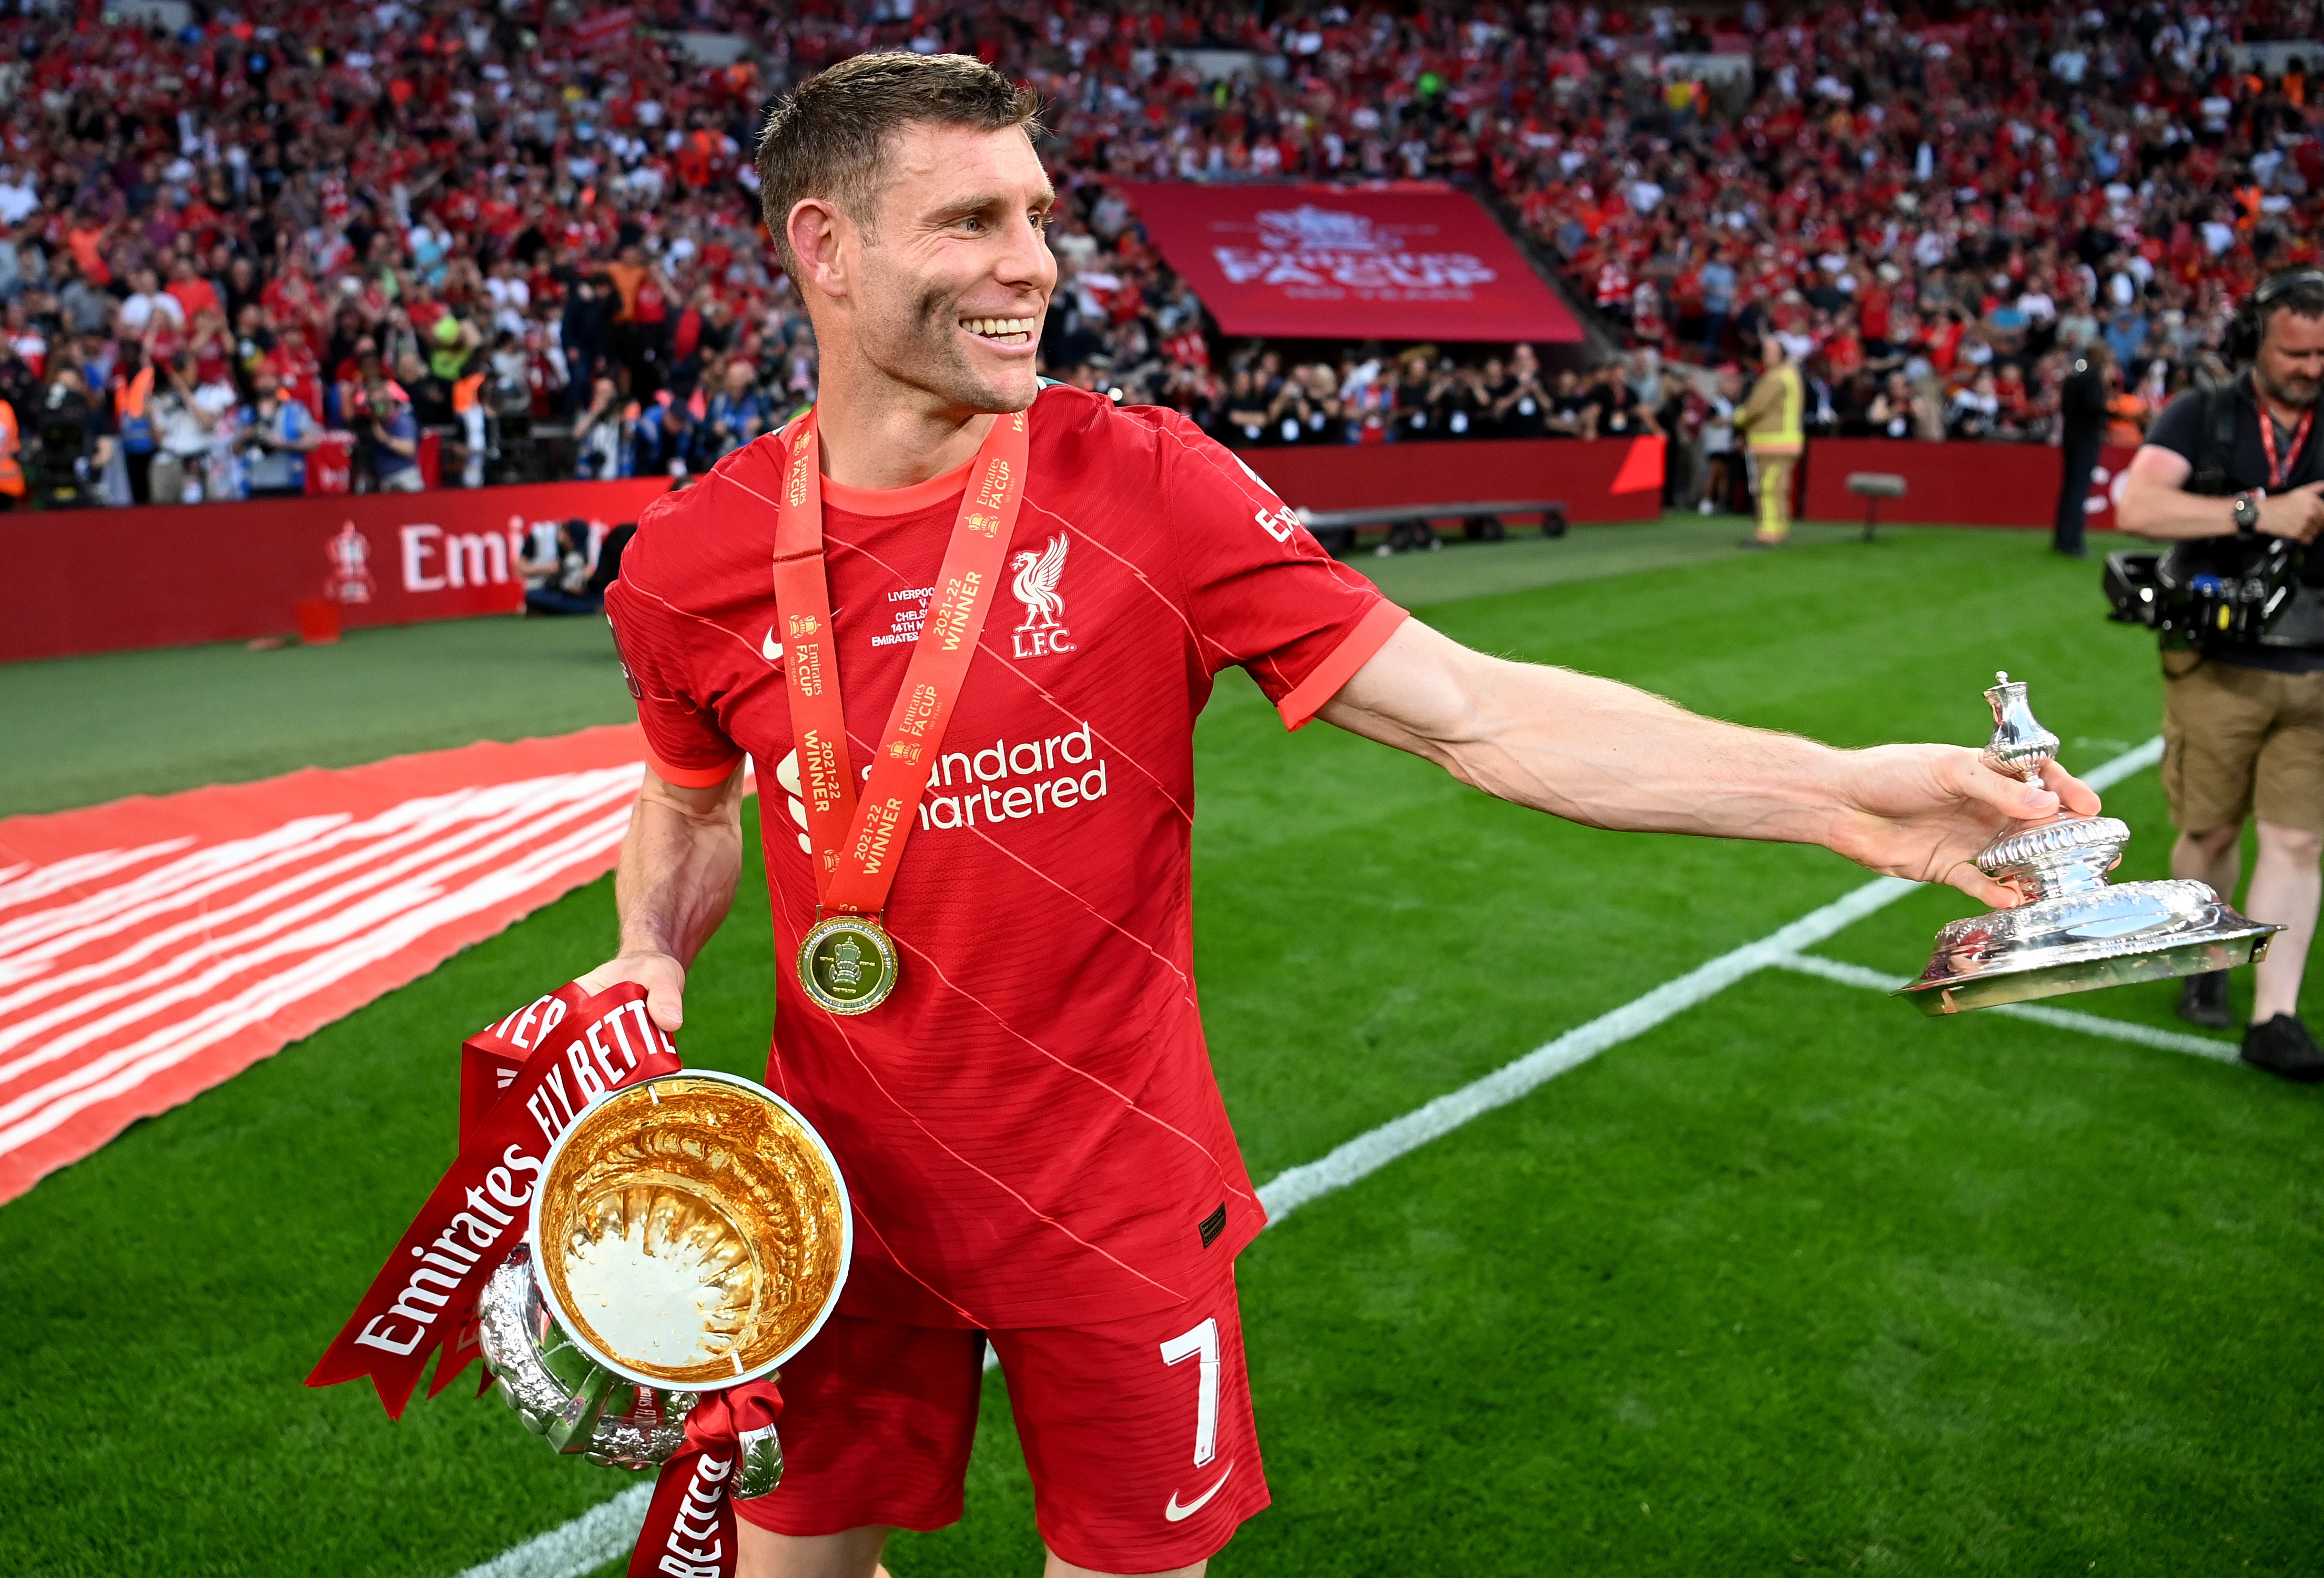 Liverpool’s veteran figure has completed a ‘clean sweep’ of trophies